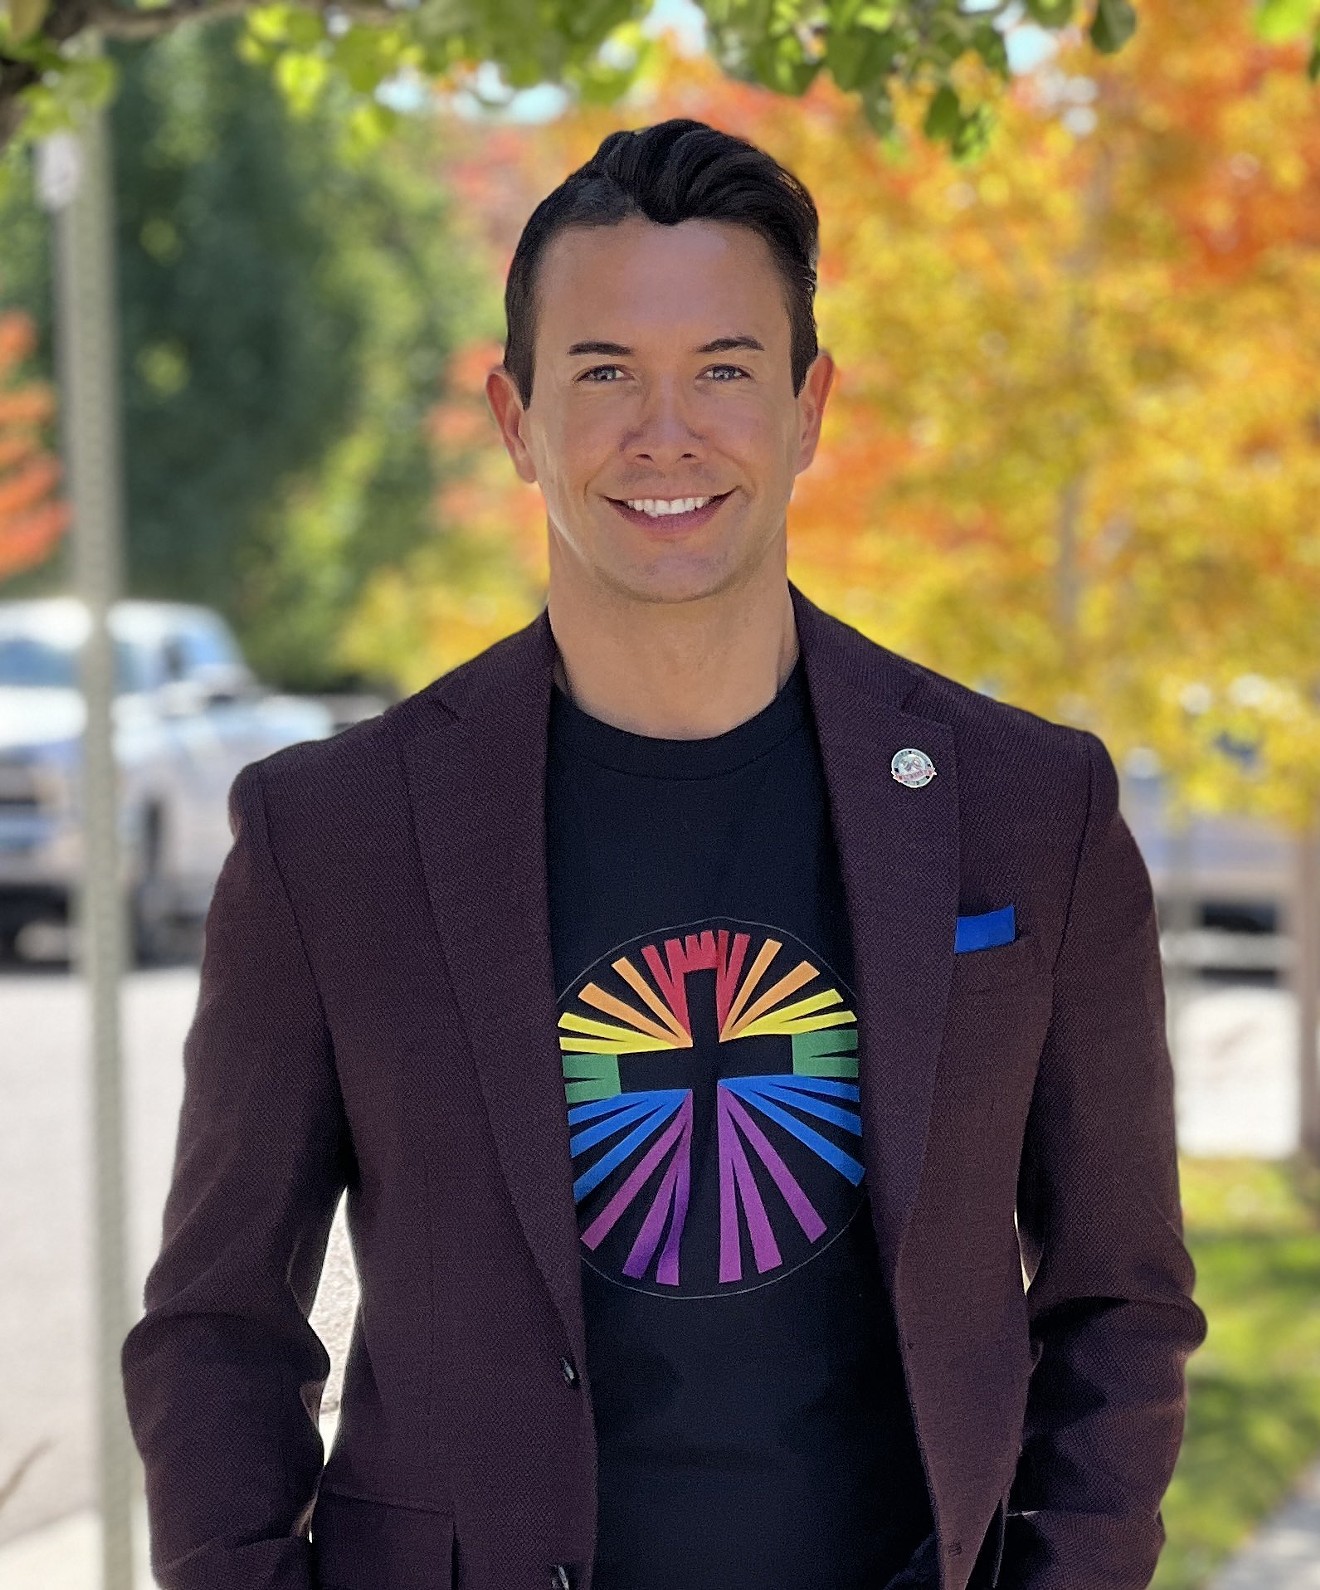 Douglas County Commissioner Abe Laydon got candid on National Coming Out Day.